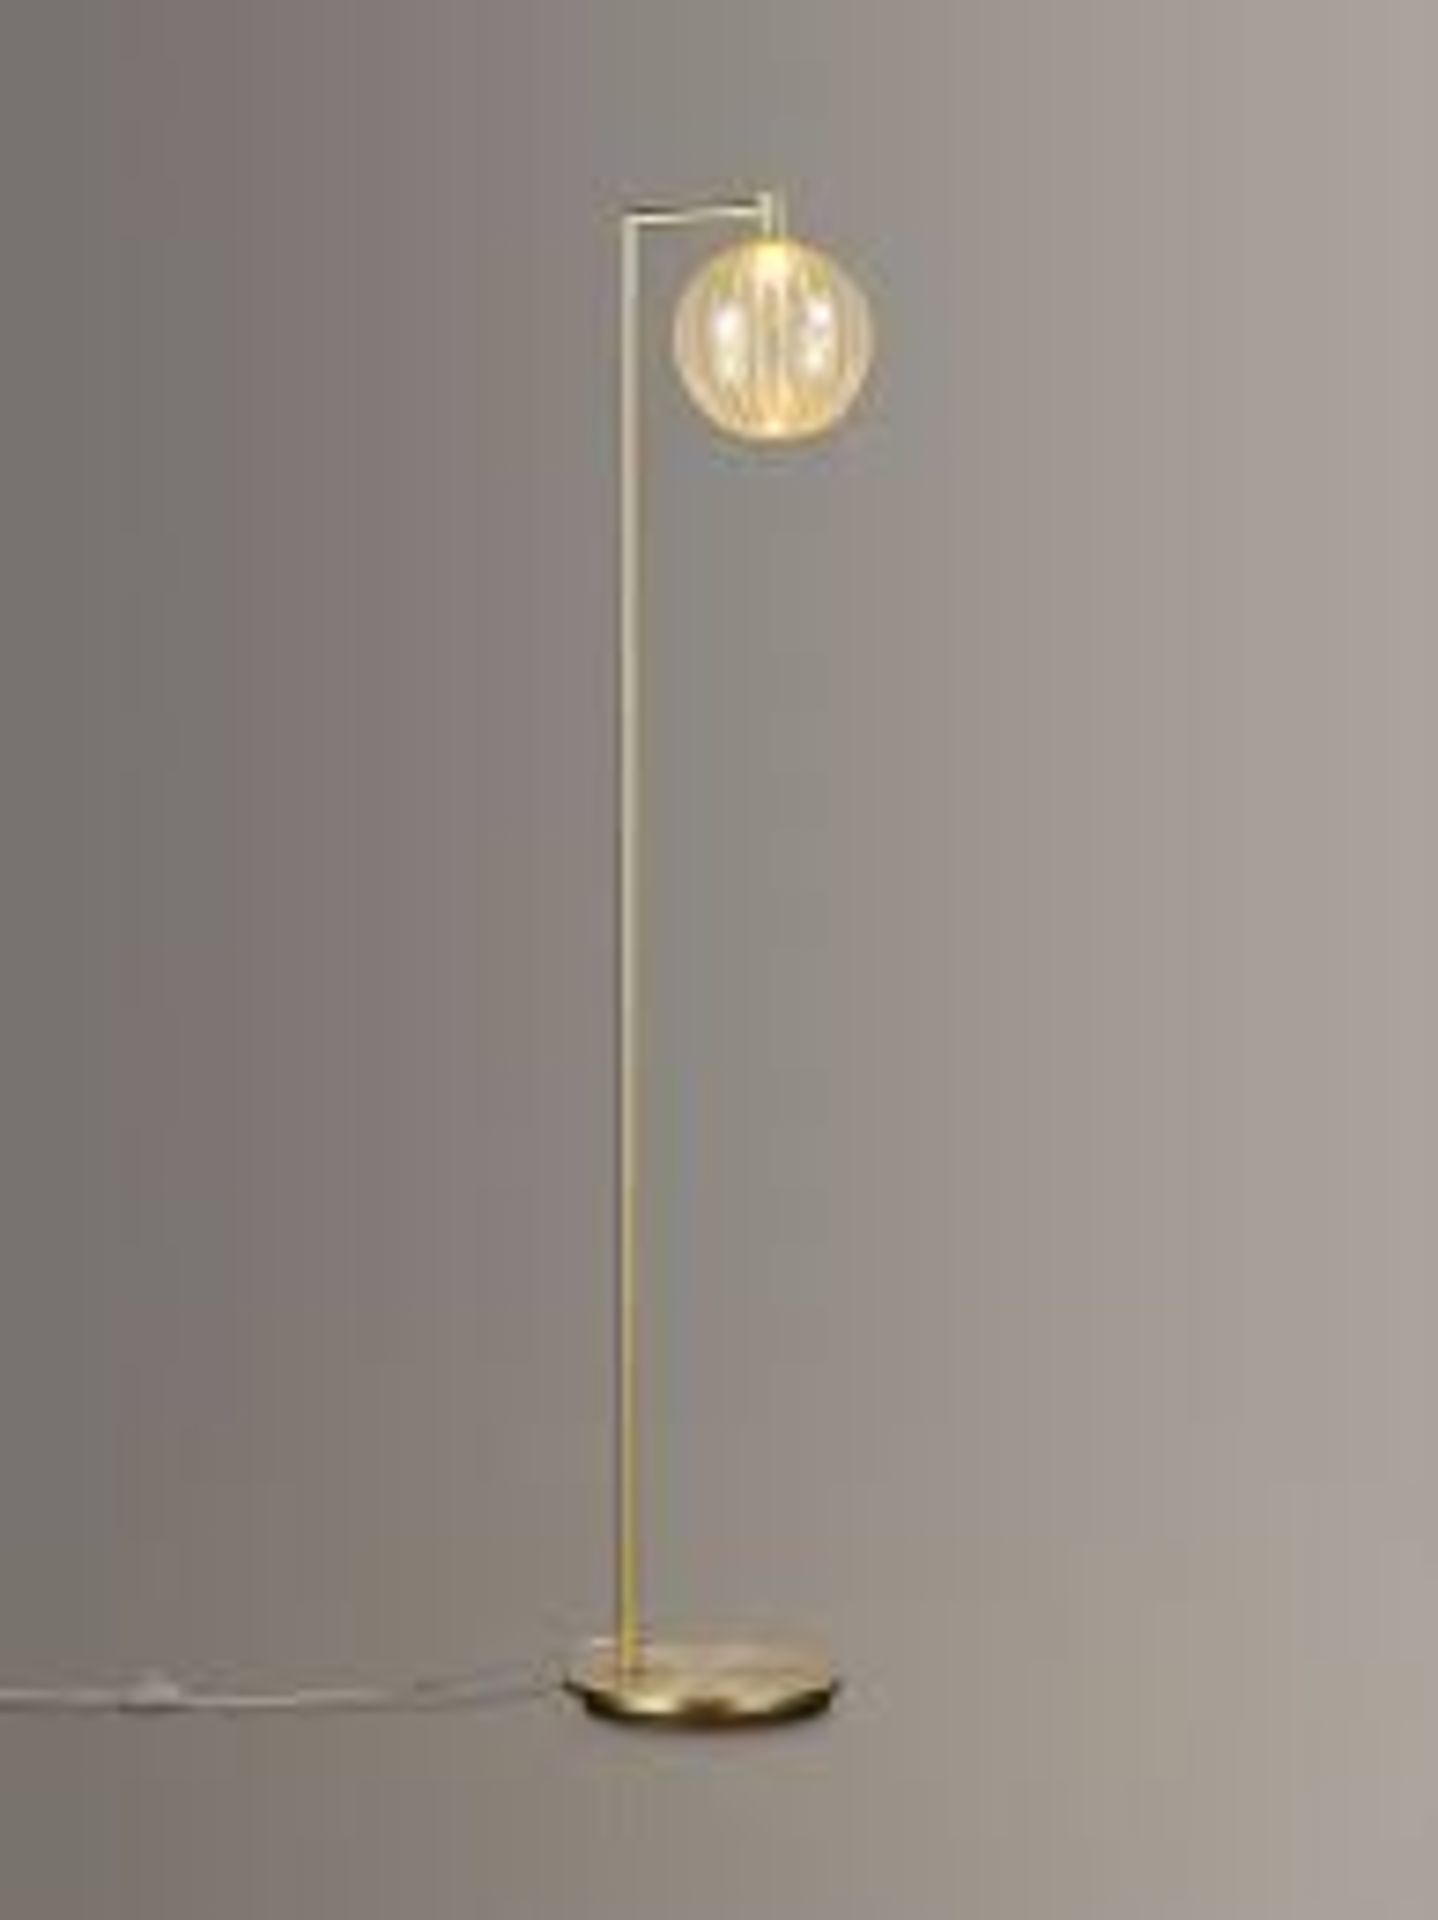 Boxed John Lewis and Partners Marlow Floor Standing Lamp in Satin Brass RRP £195 (2657654) (Public